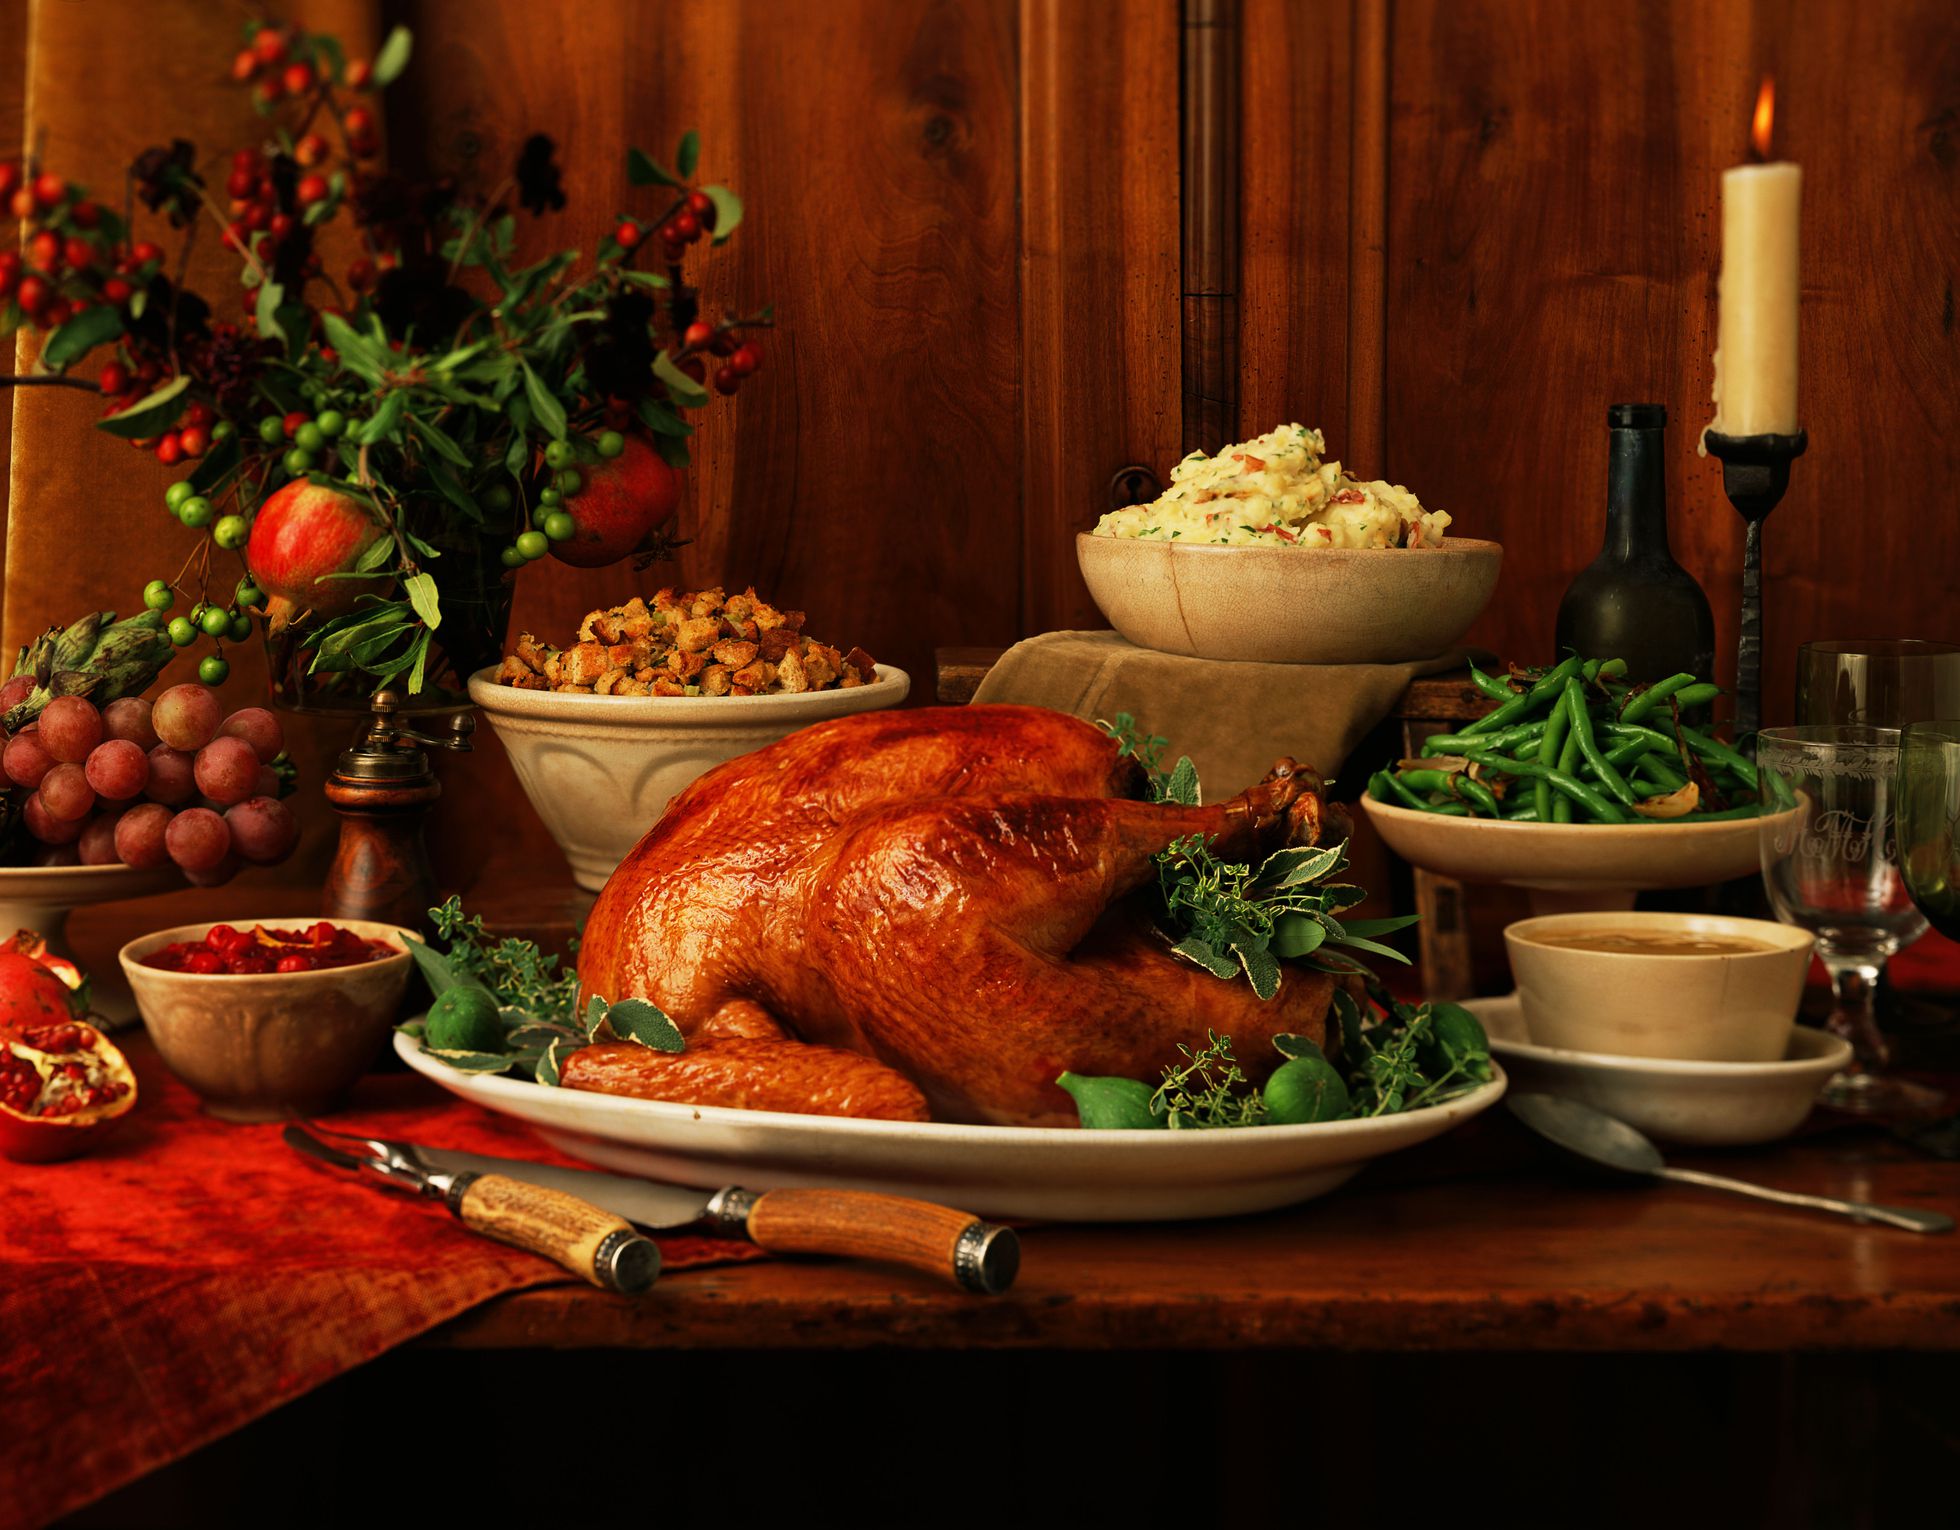 Thanksgiving In France - Where to celebrate the Festive Day